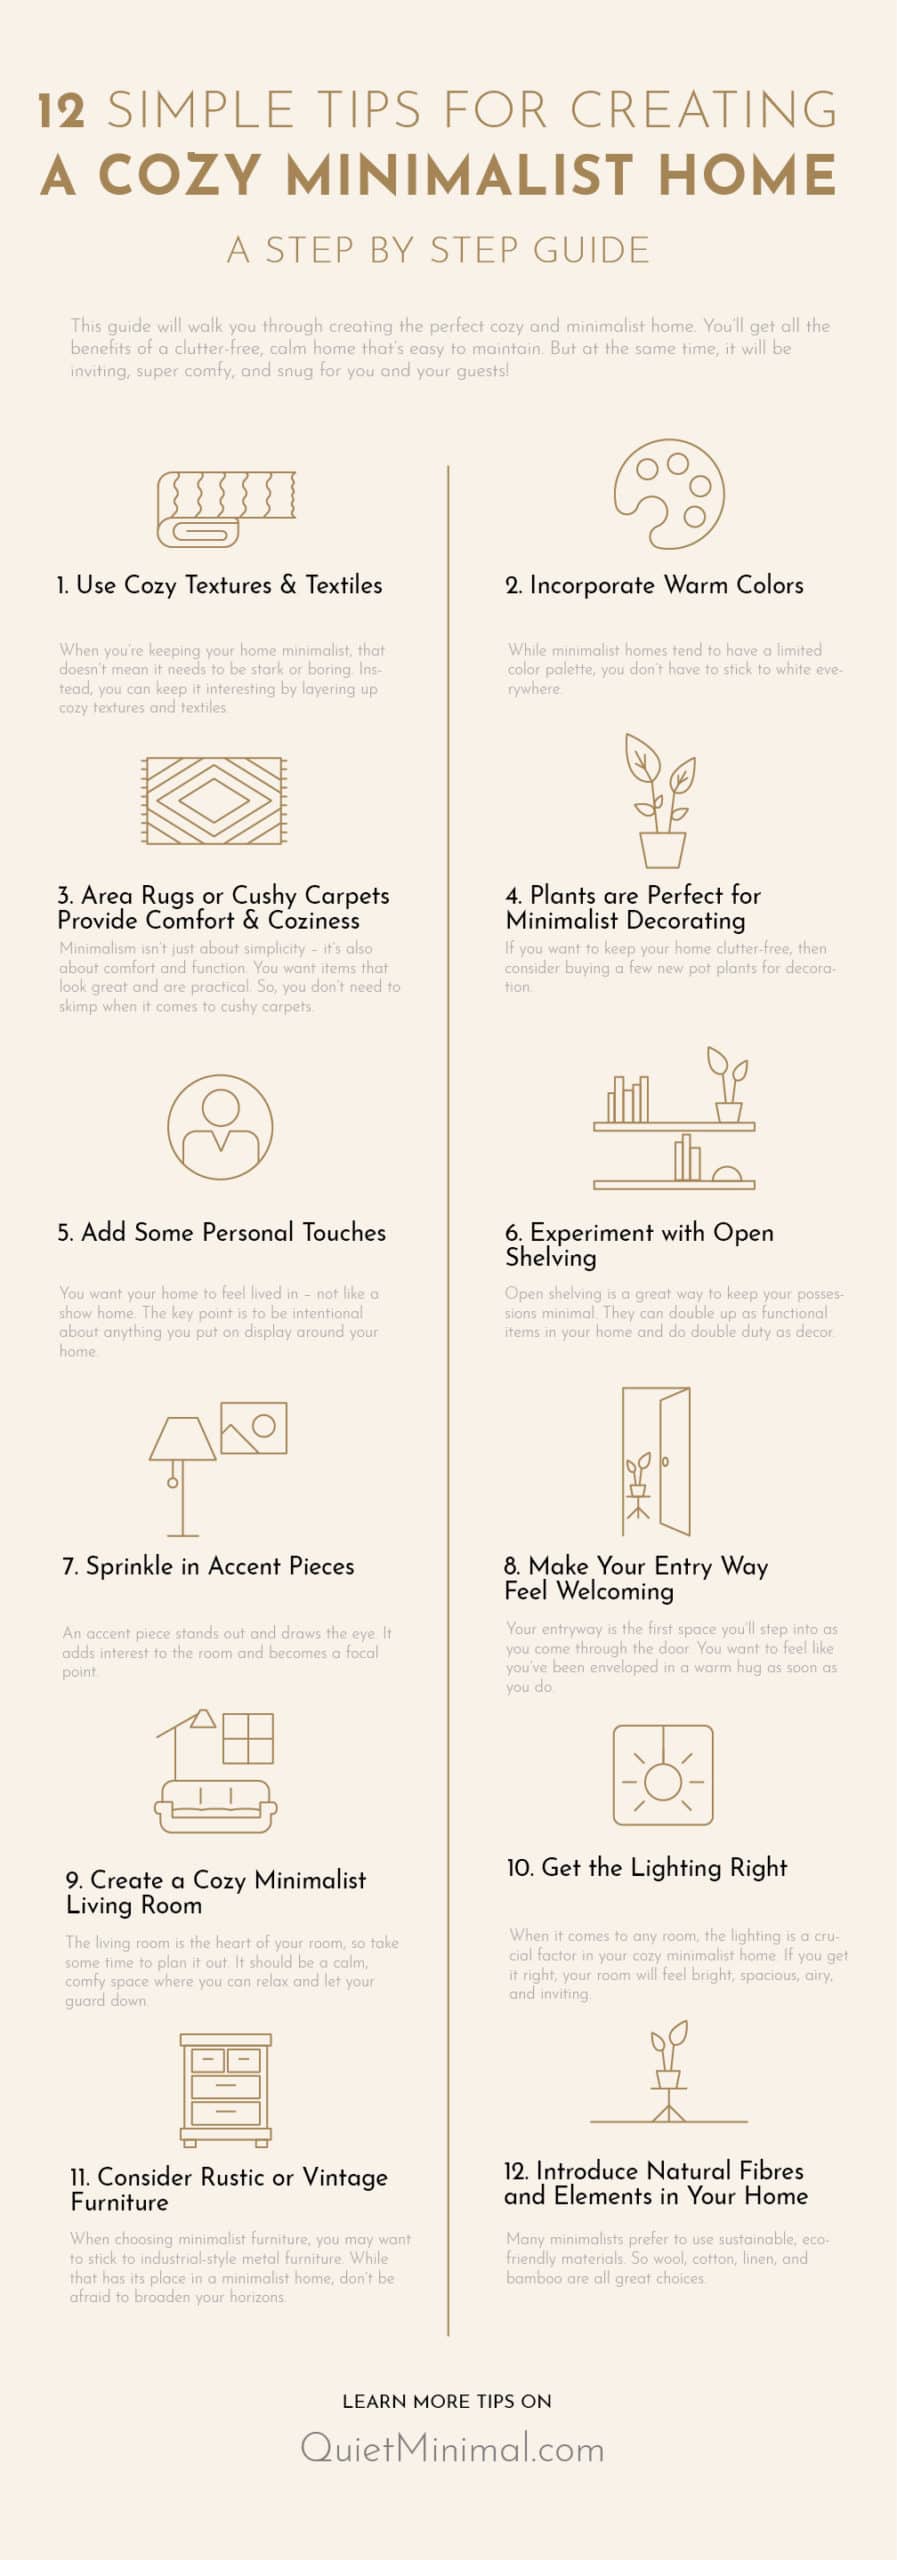 12 simple tips for creating a cozy minimalist home, a step by step guide